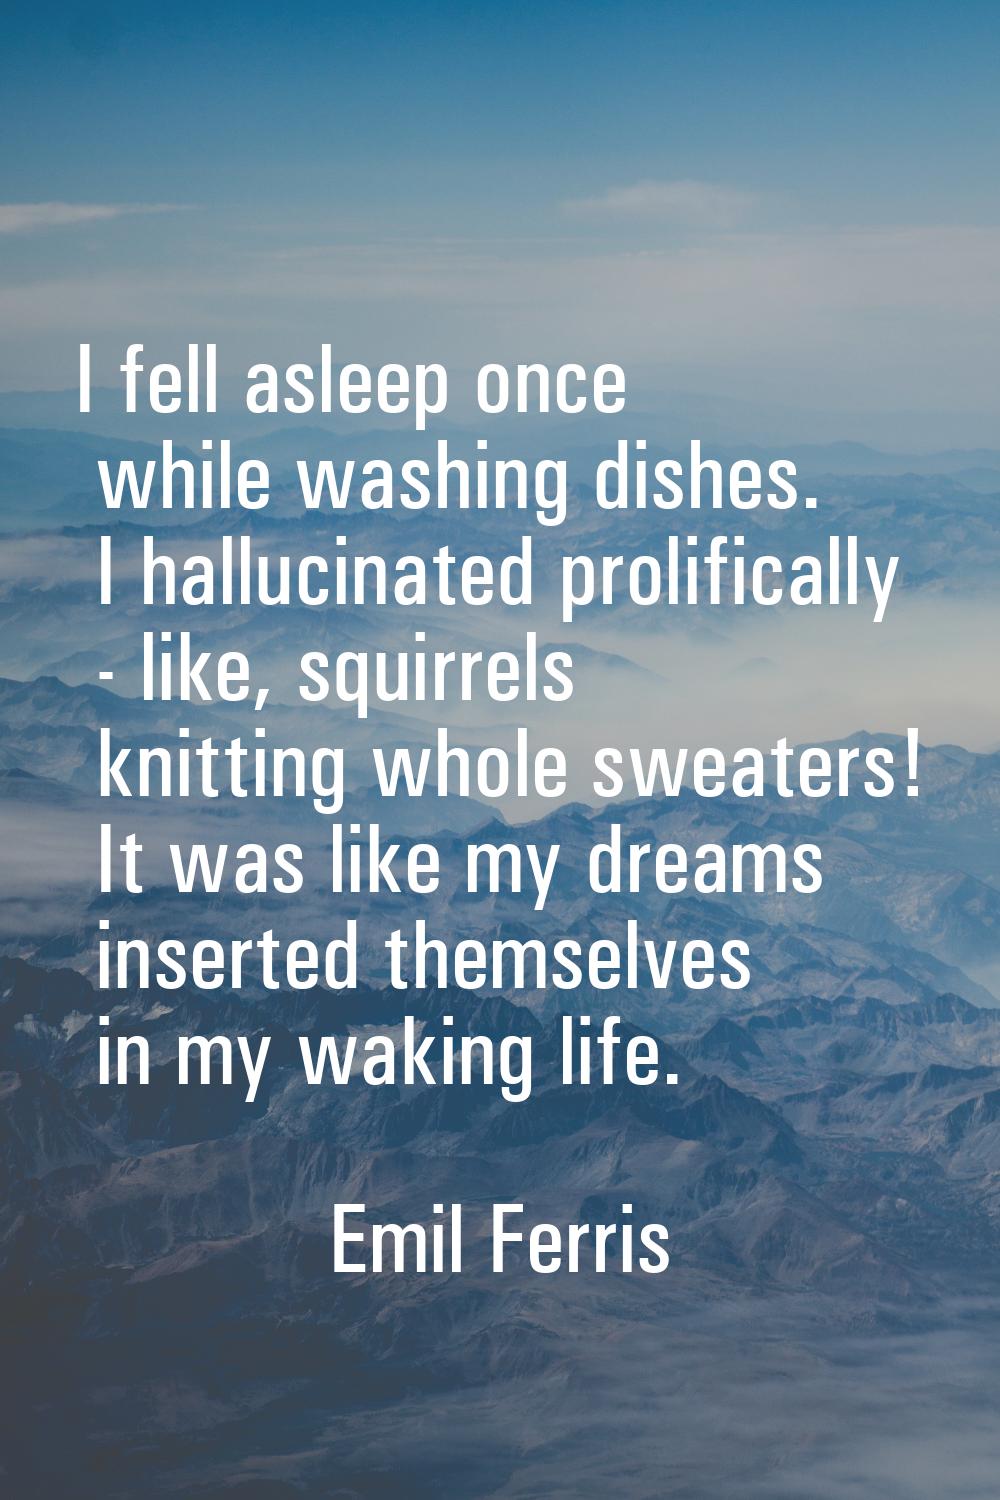 I fell asleep once while washing dishes. I hallucinated prolifically - like, squirrels knitting who